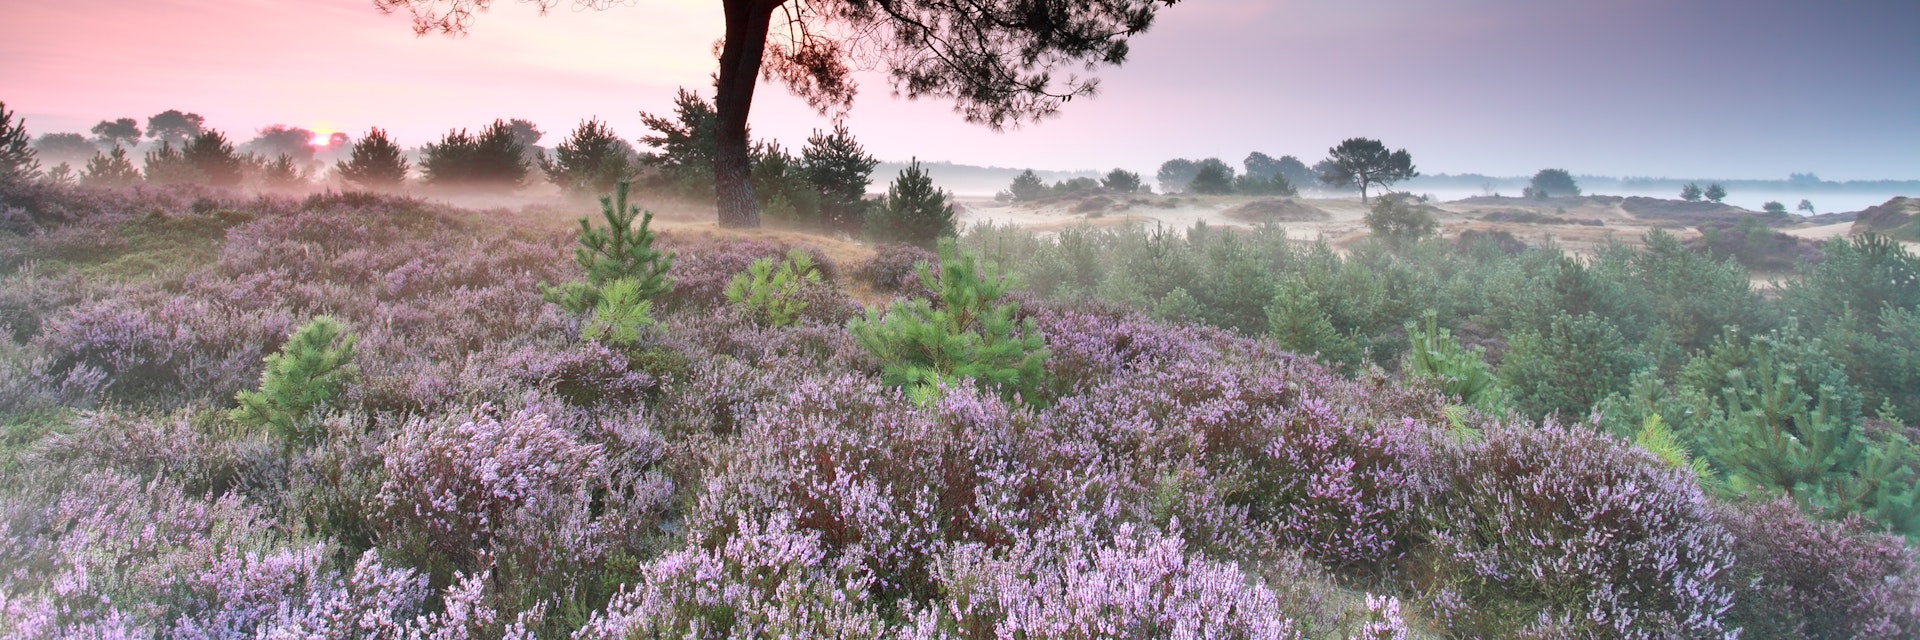 heather flowering at misty sunrise, Friesland, Netherlands; Shutterstock ID 331078466; Your name (First / Last): Daniel Fahey; GL account no.: 65050; Netsuite department name: Online Editorial; Full Product or Project name including edition: Friesland page